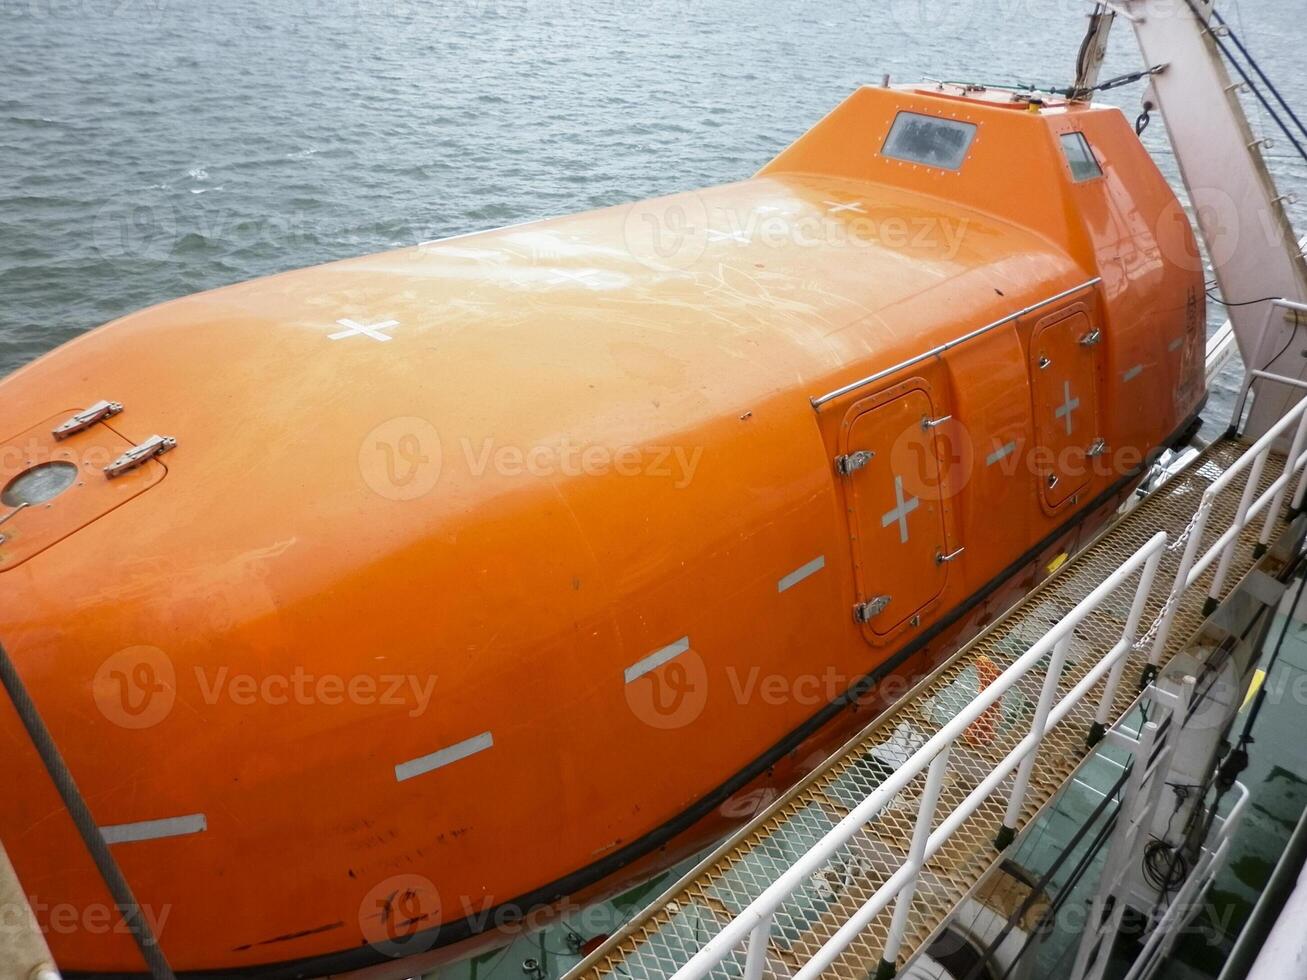 A lifeboat in case of an accident in the port or on a ship. The photo